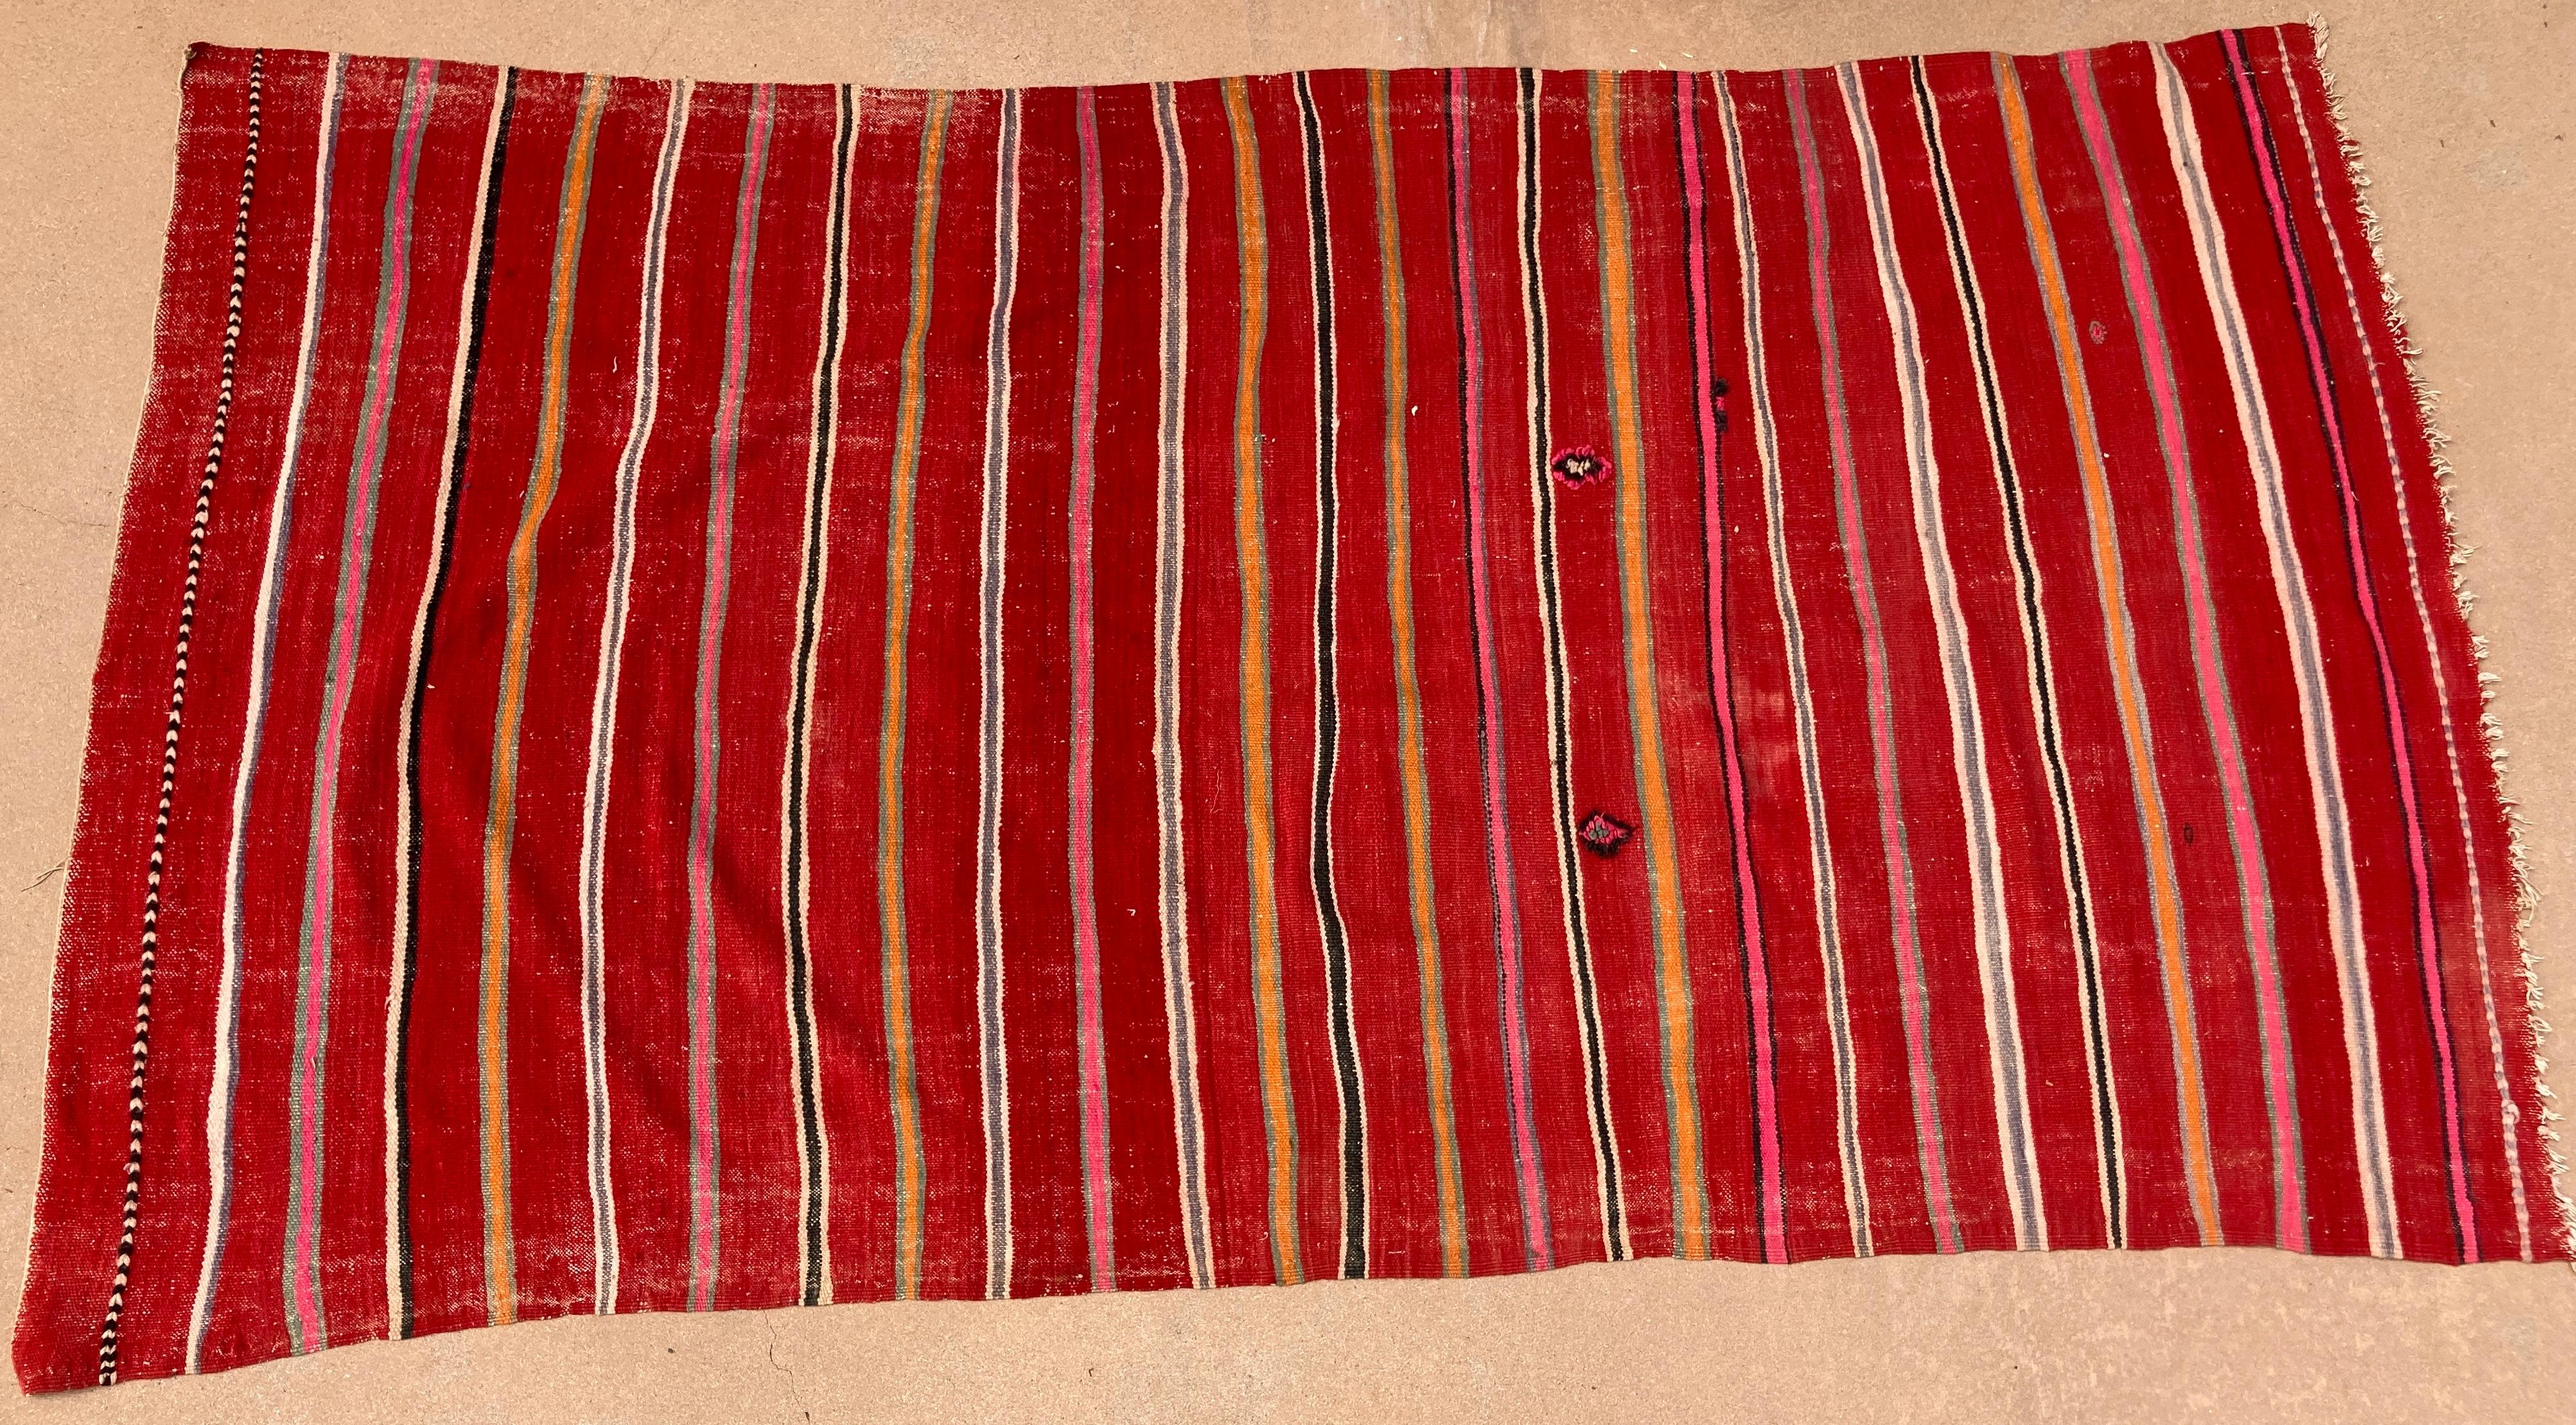 1060s authentic vintage Moroccan flat-weave Kilim Berber rug.Large size vintage Moroccan ethnic rug, handwoven by Berber women in Morocco for their own use.This rug was made using flat-weave technique with linear pattern of alternating stripes in